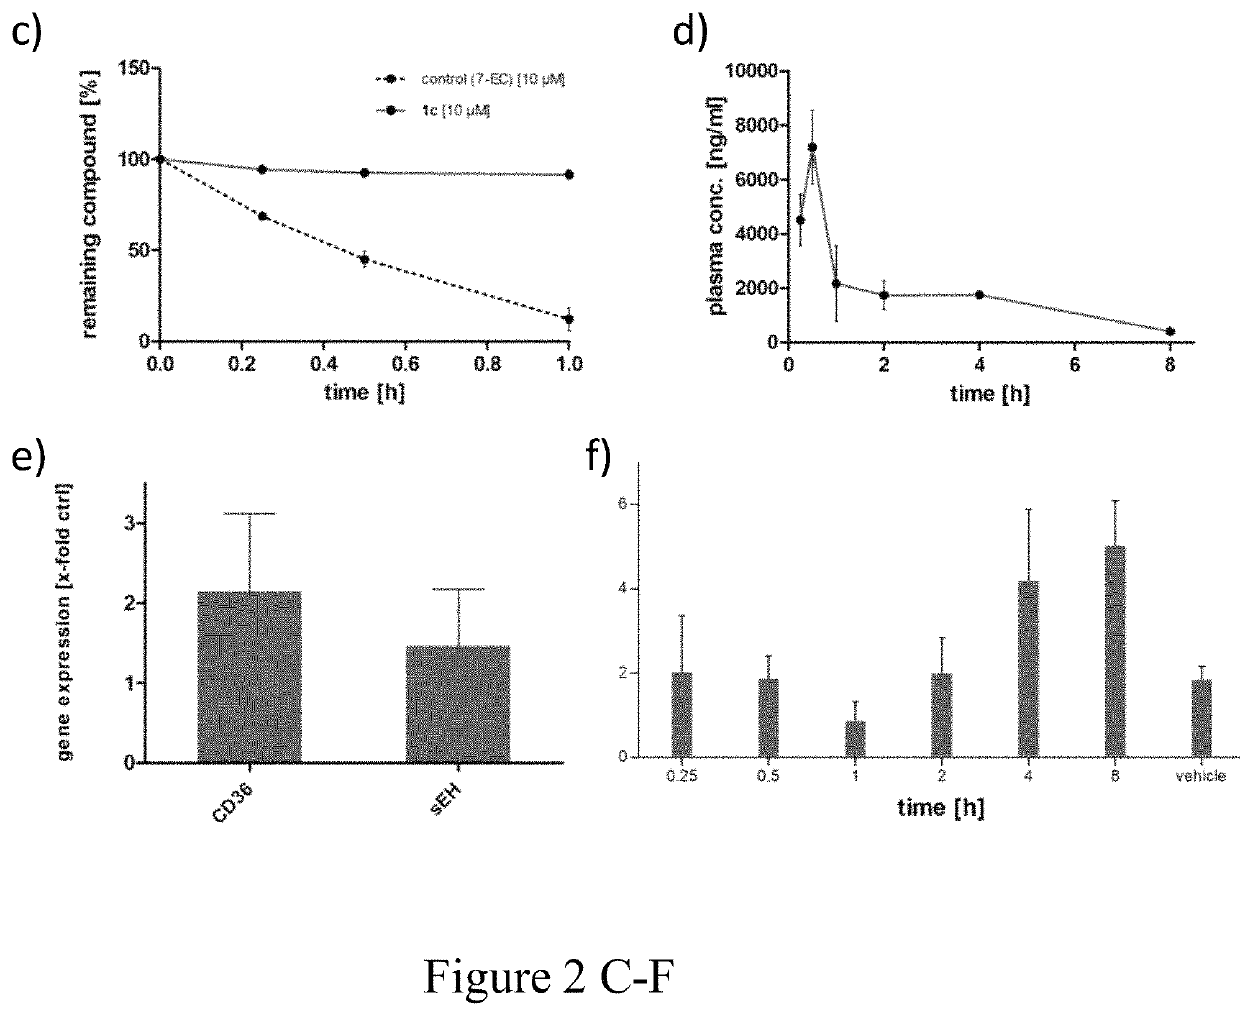 Diabetes and metabolic syndrome treatment with a novel dual modulator of soluble epoxide hydrolase and peroxisome proliferator-activated receptors